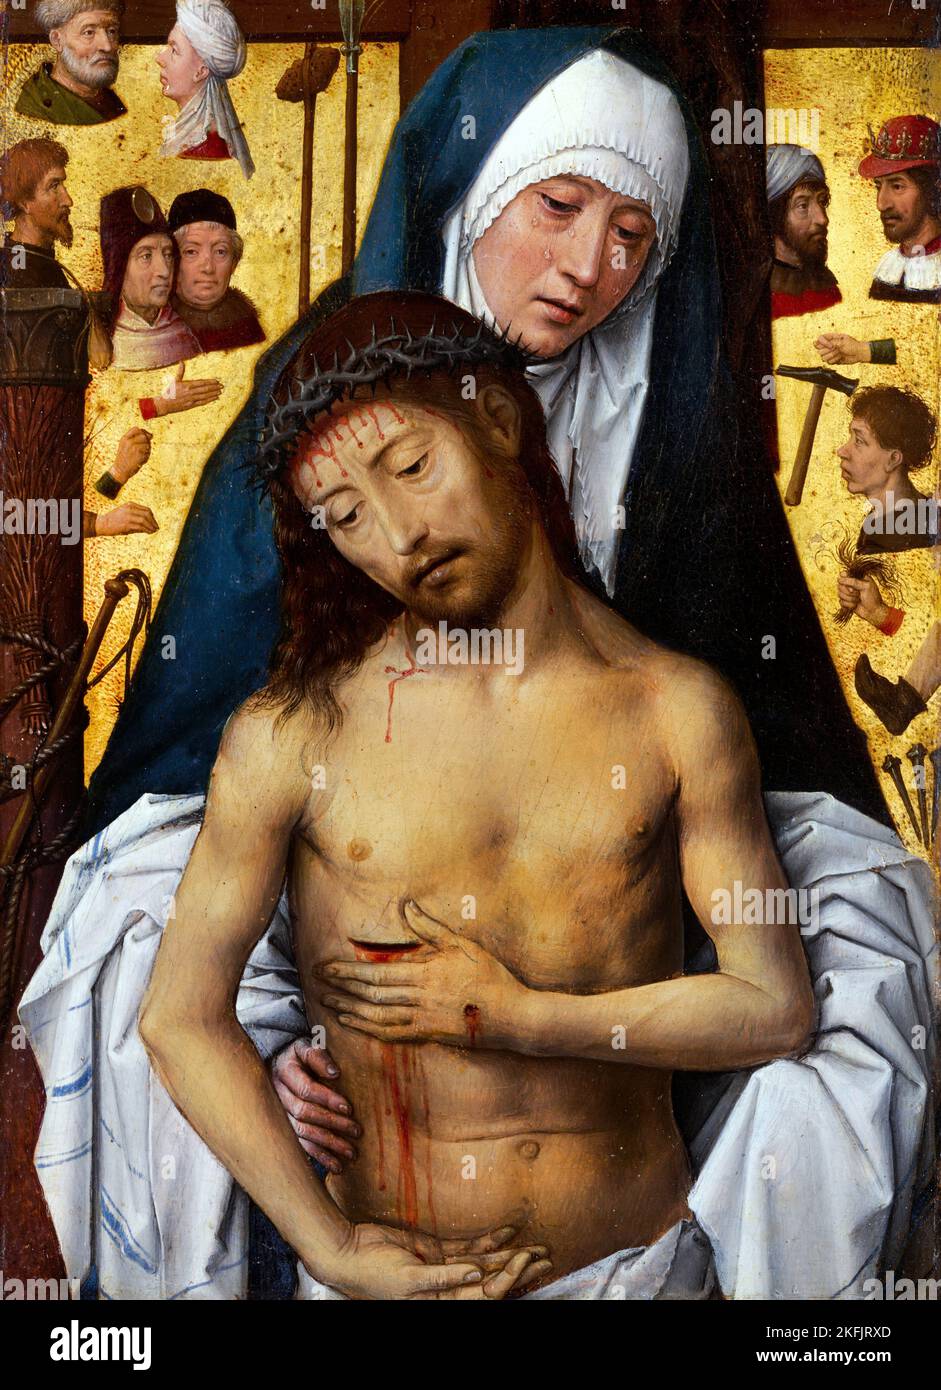 Hans Memling; The Man of Sorrows in the Arms of the Virgin; Circa 1475-1479; Oil on panel; National Gallery of Victoria, Australia. Stock Photo